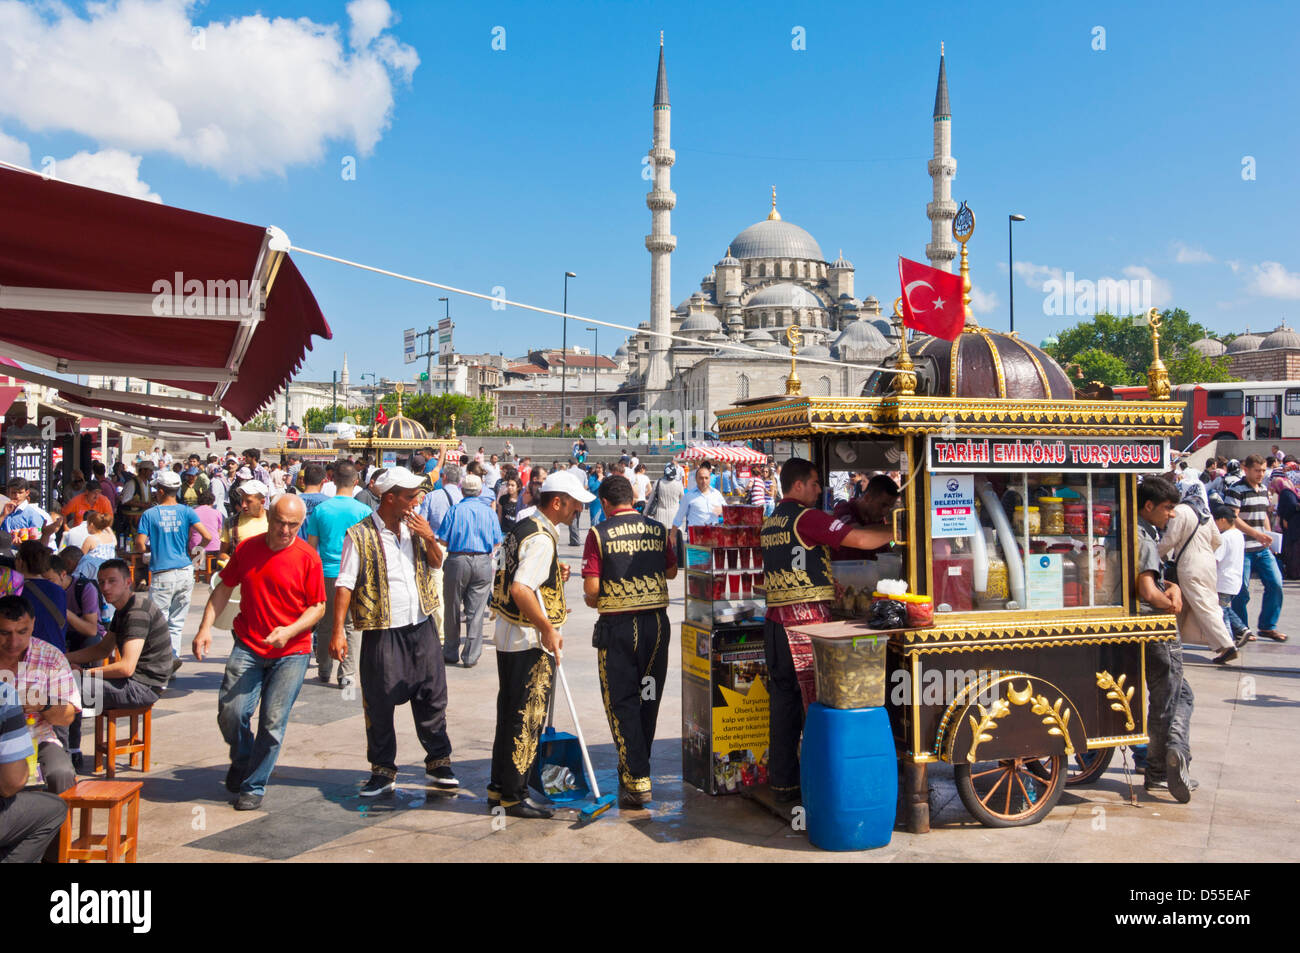 Food stall with Turkish Flag in front of New Mosque (New Mosque), Eminonu, Istanbul, Turkey Stock Photo